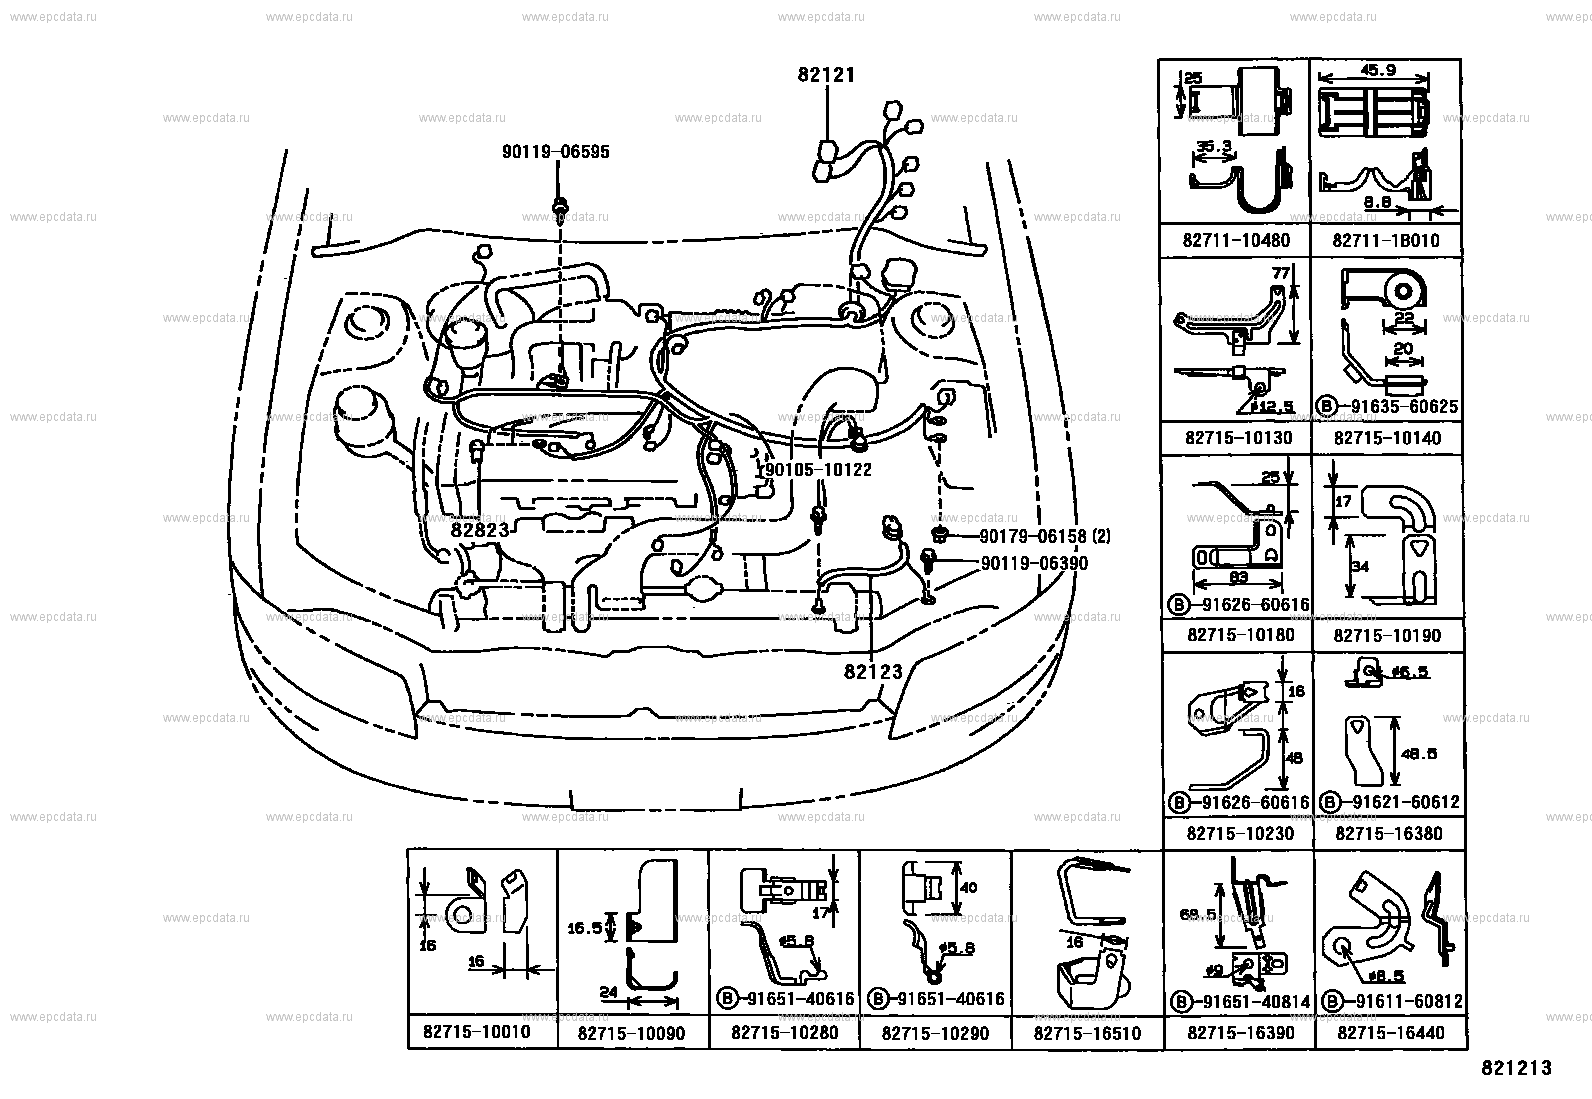 Diagram In Pictures Database  Toyota Starlet Wiring